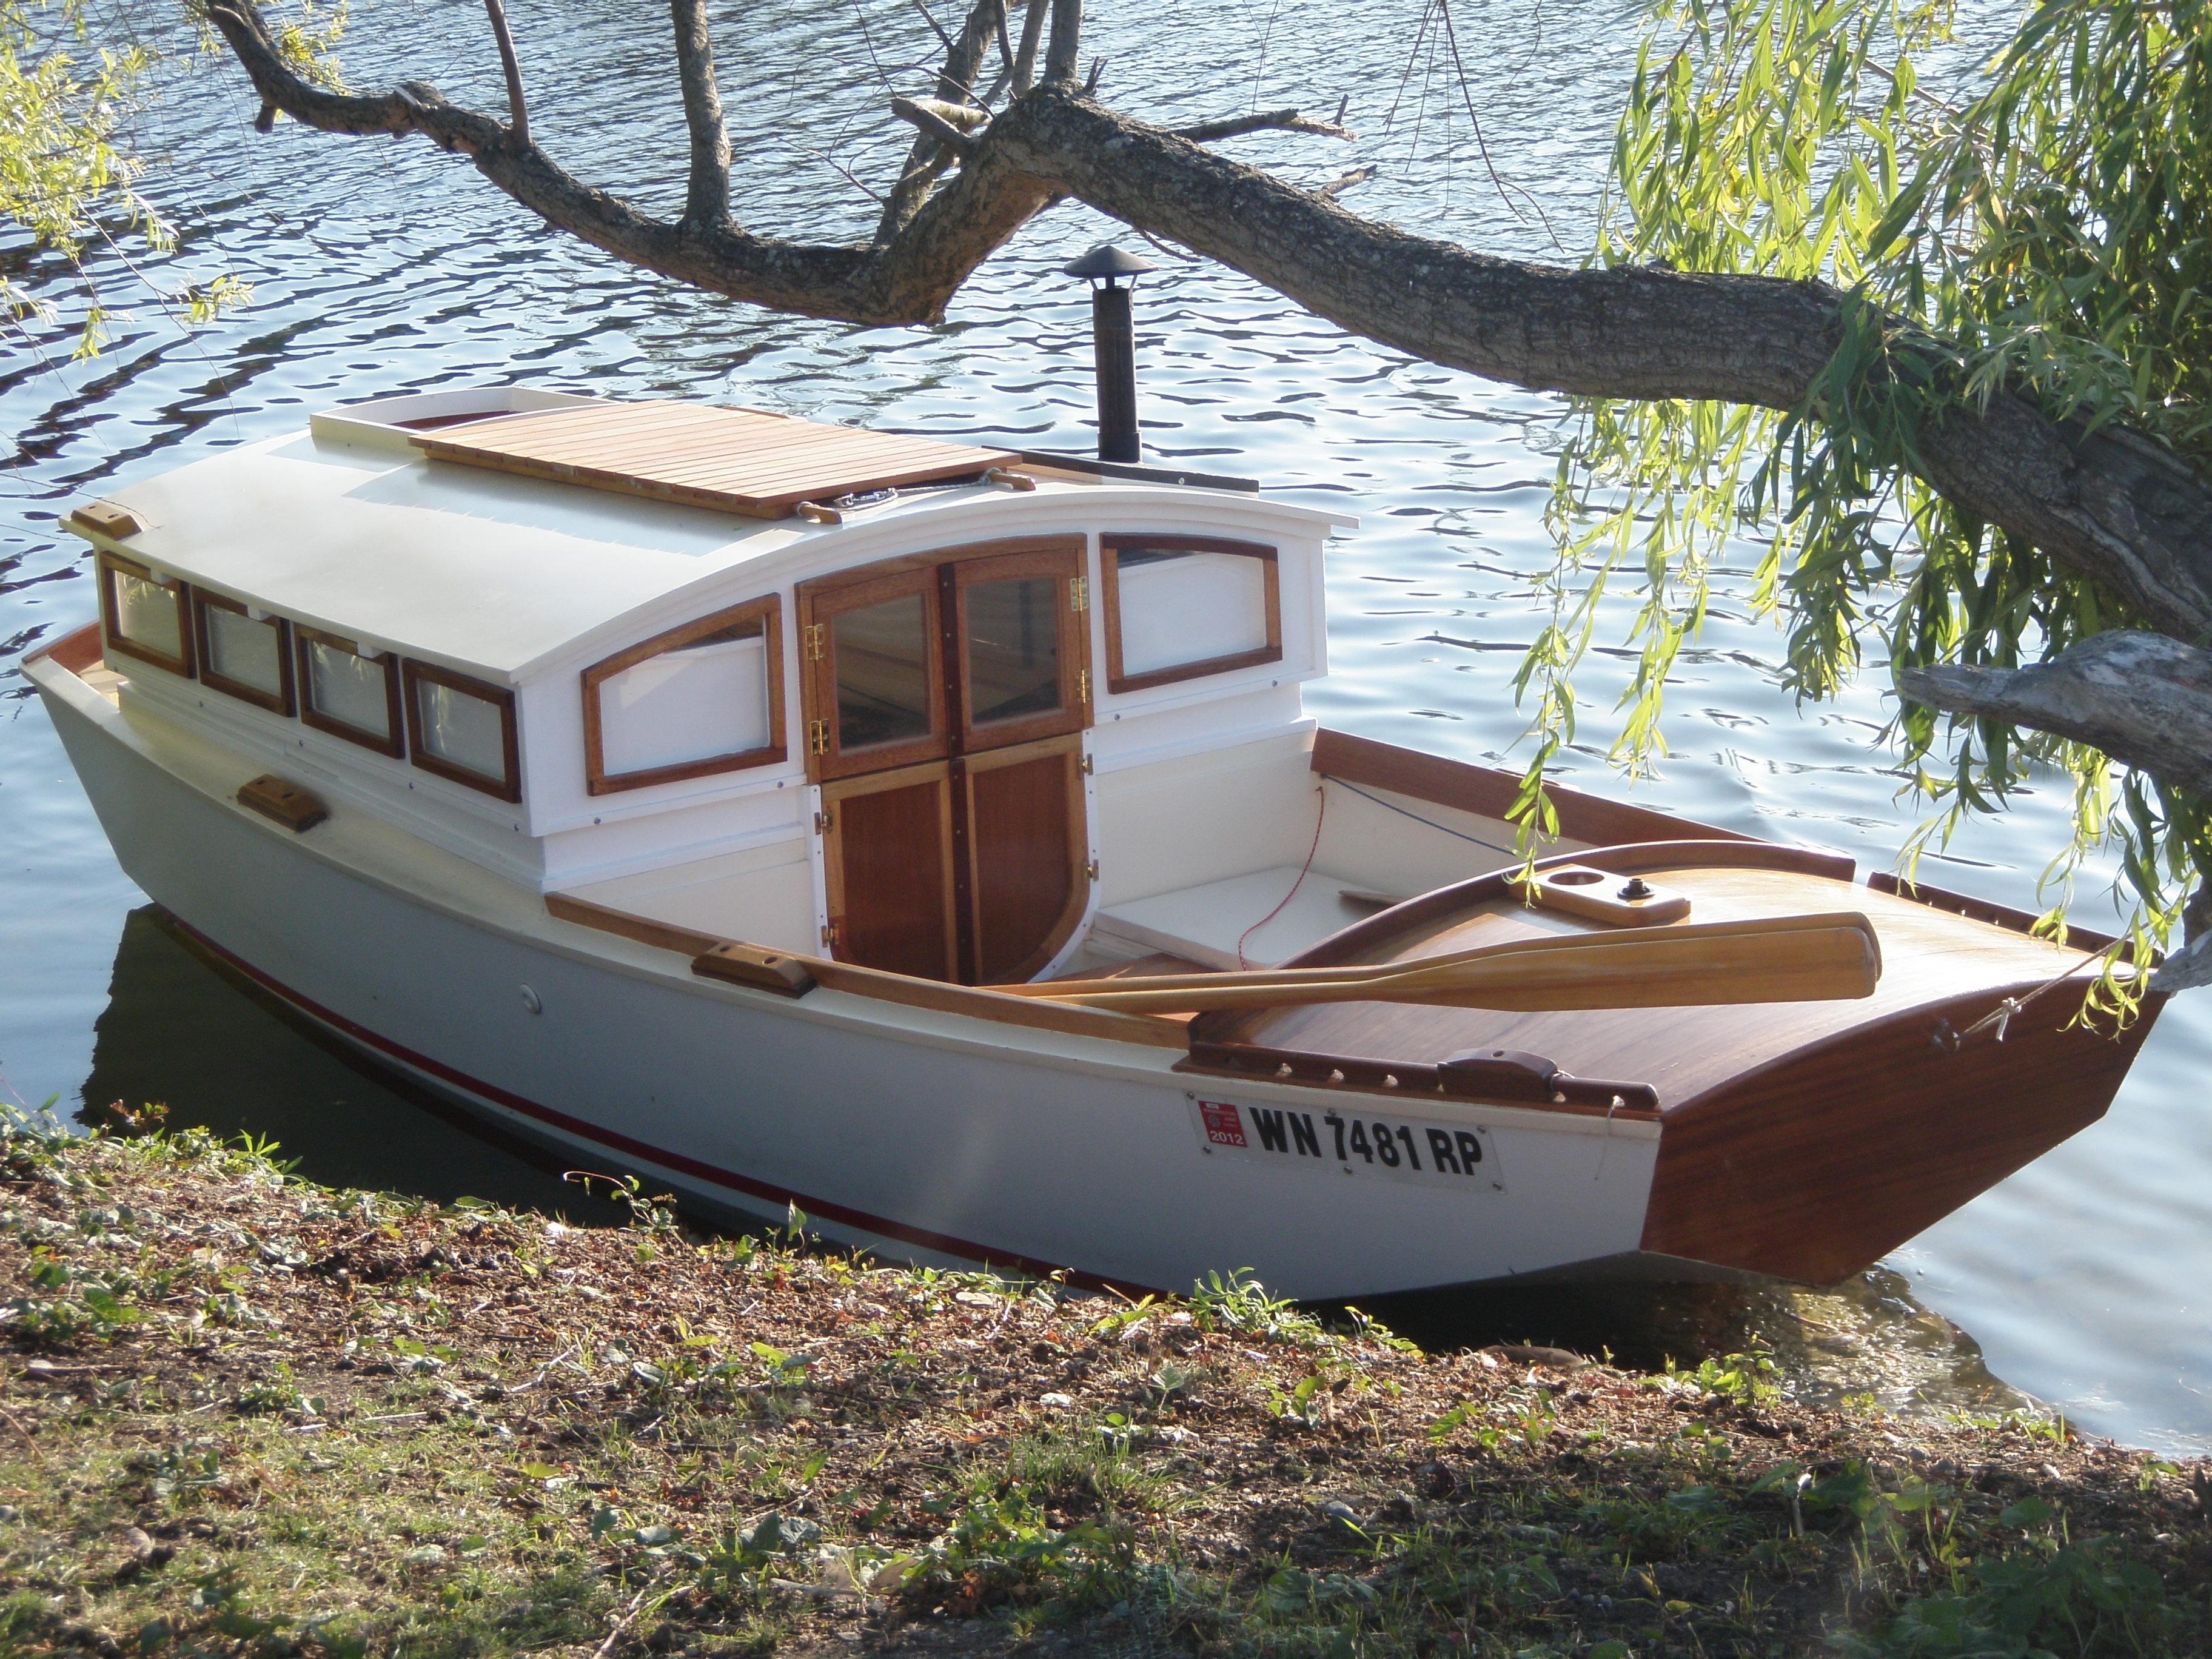 Bearings: The Blog of The Center for Wooden Boats Page 15